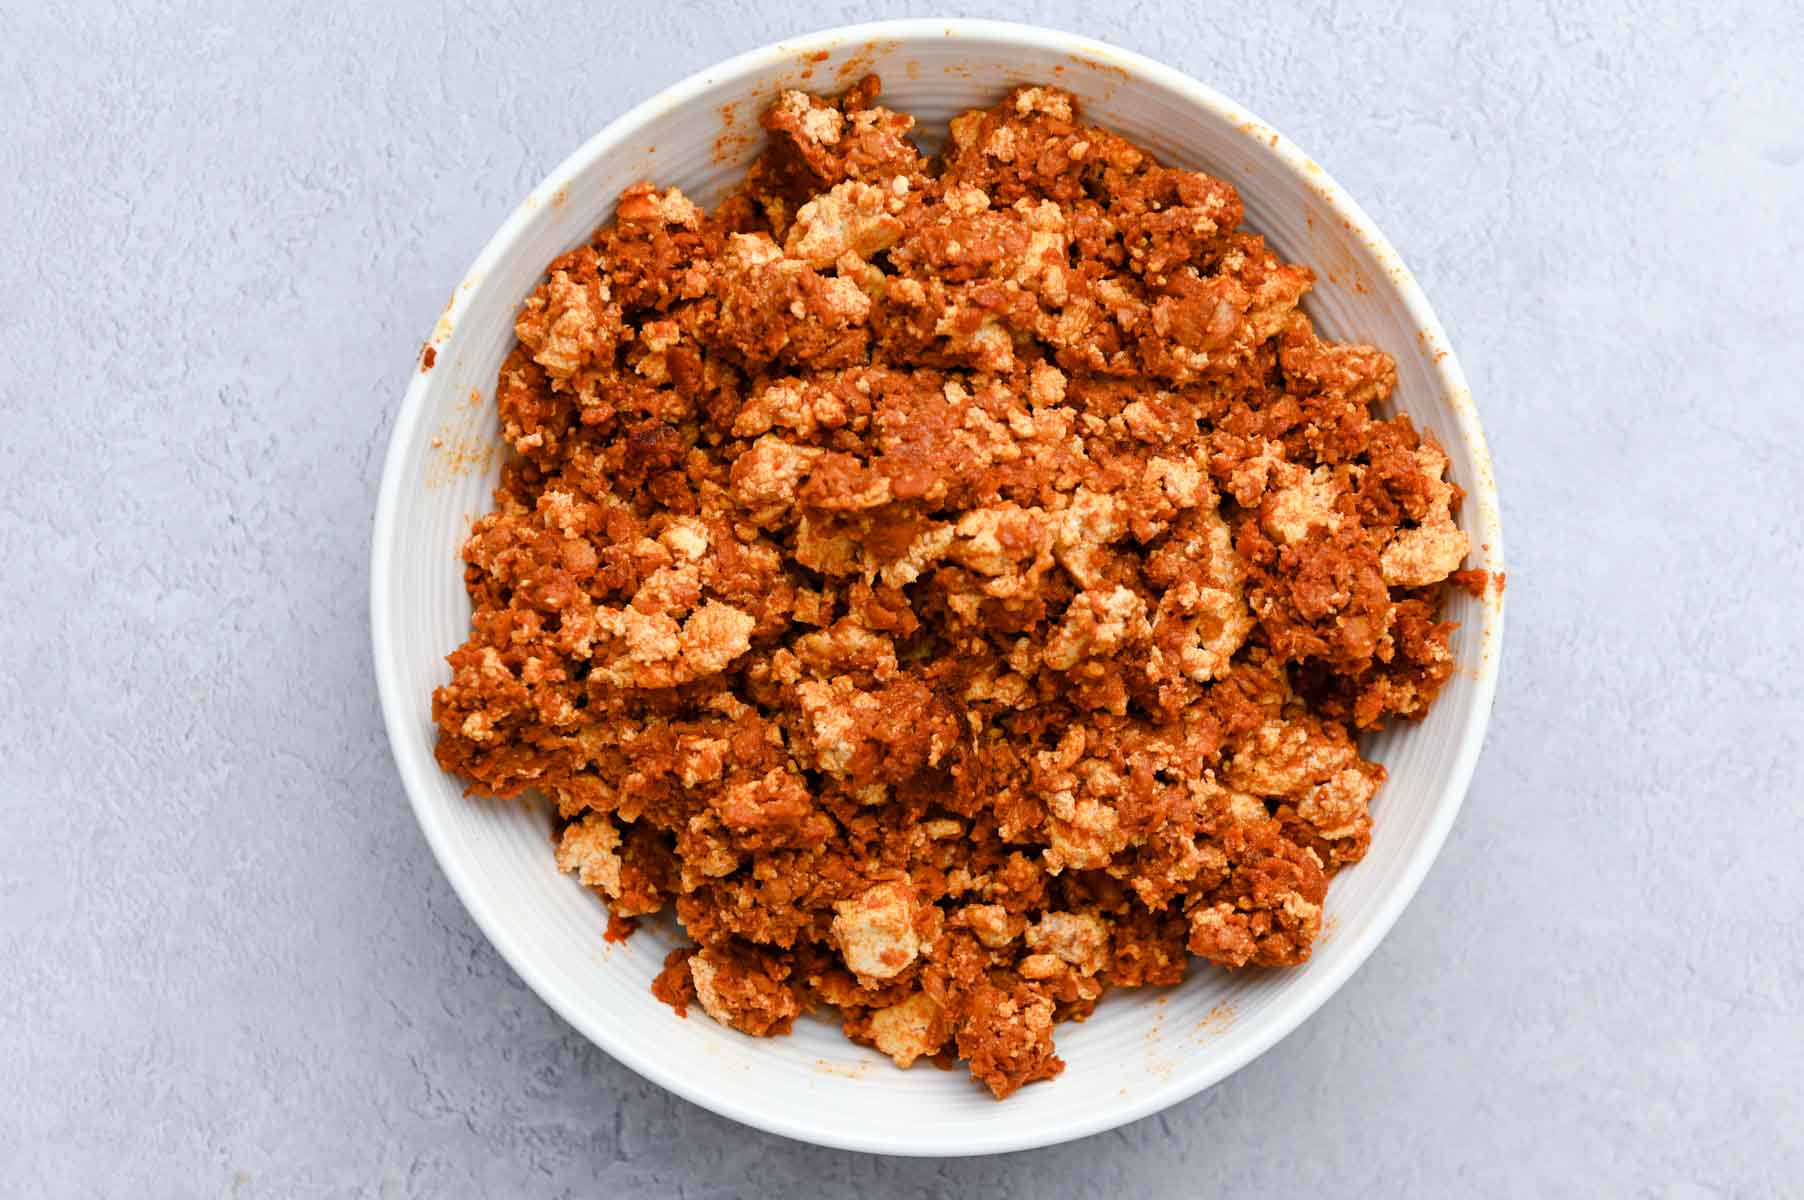 Soy chorizo and tofu in a white bowl.